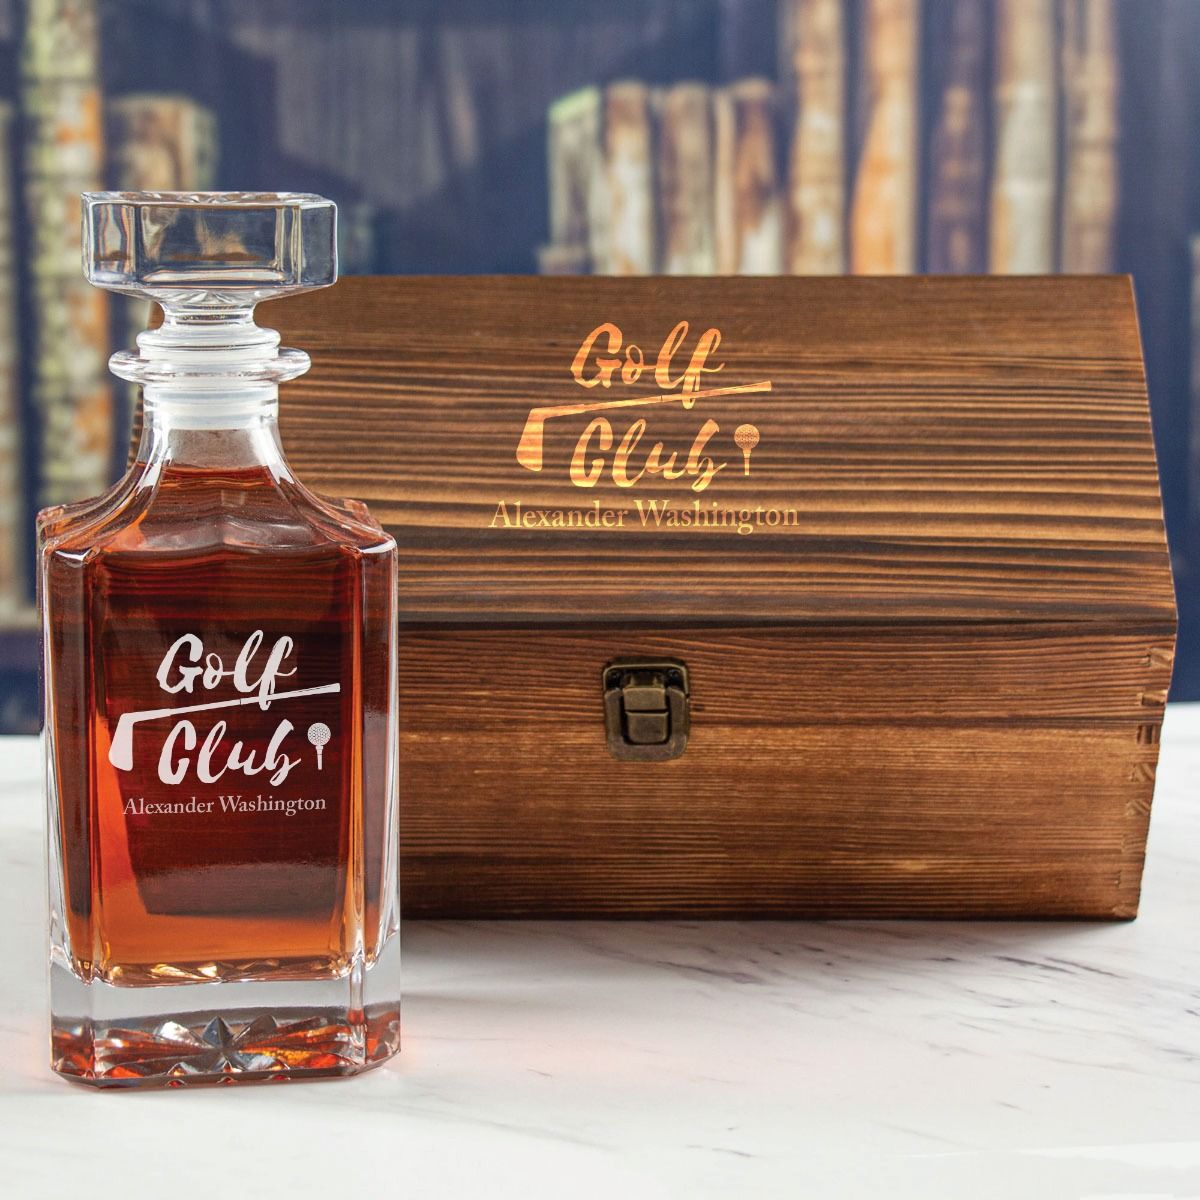 Custom Engraved Golf Club - Personalized Whiskey Decanter In Wood Gift Box  - Promotional Products - Custom Gifts - Party Favors - Corporate Gifts -  Personalized Gifts